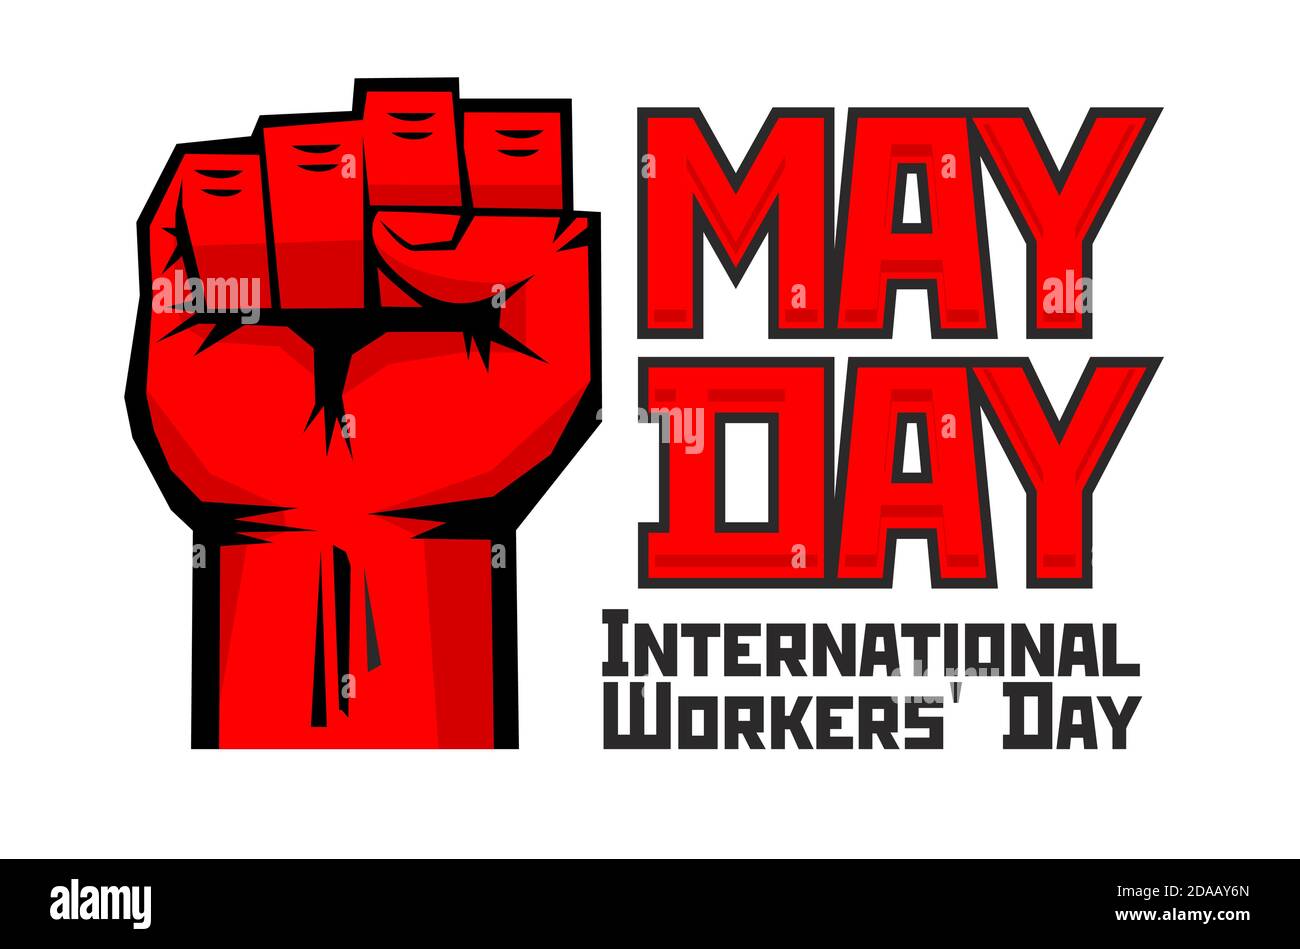 May Day greeting card for International Workers' Day. May 1 - symbol of revolutionary protest is red clenched fist raised up. Illustration, vector Stock Vector